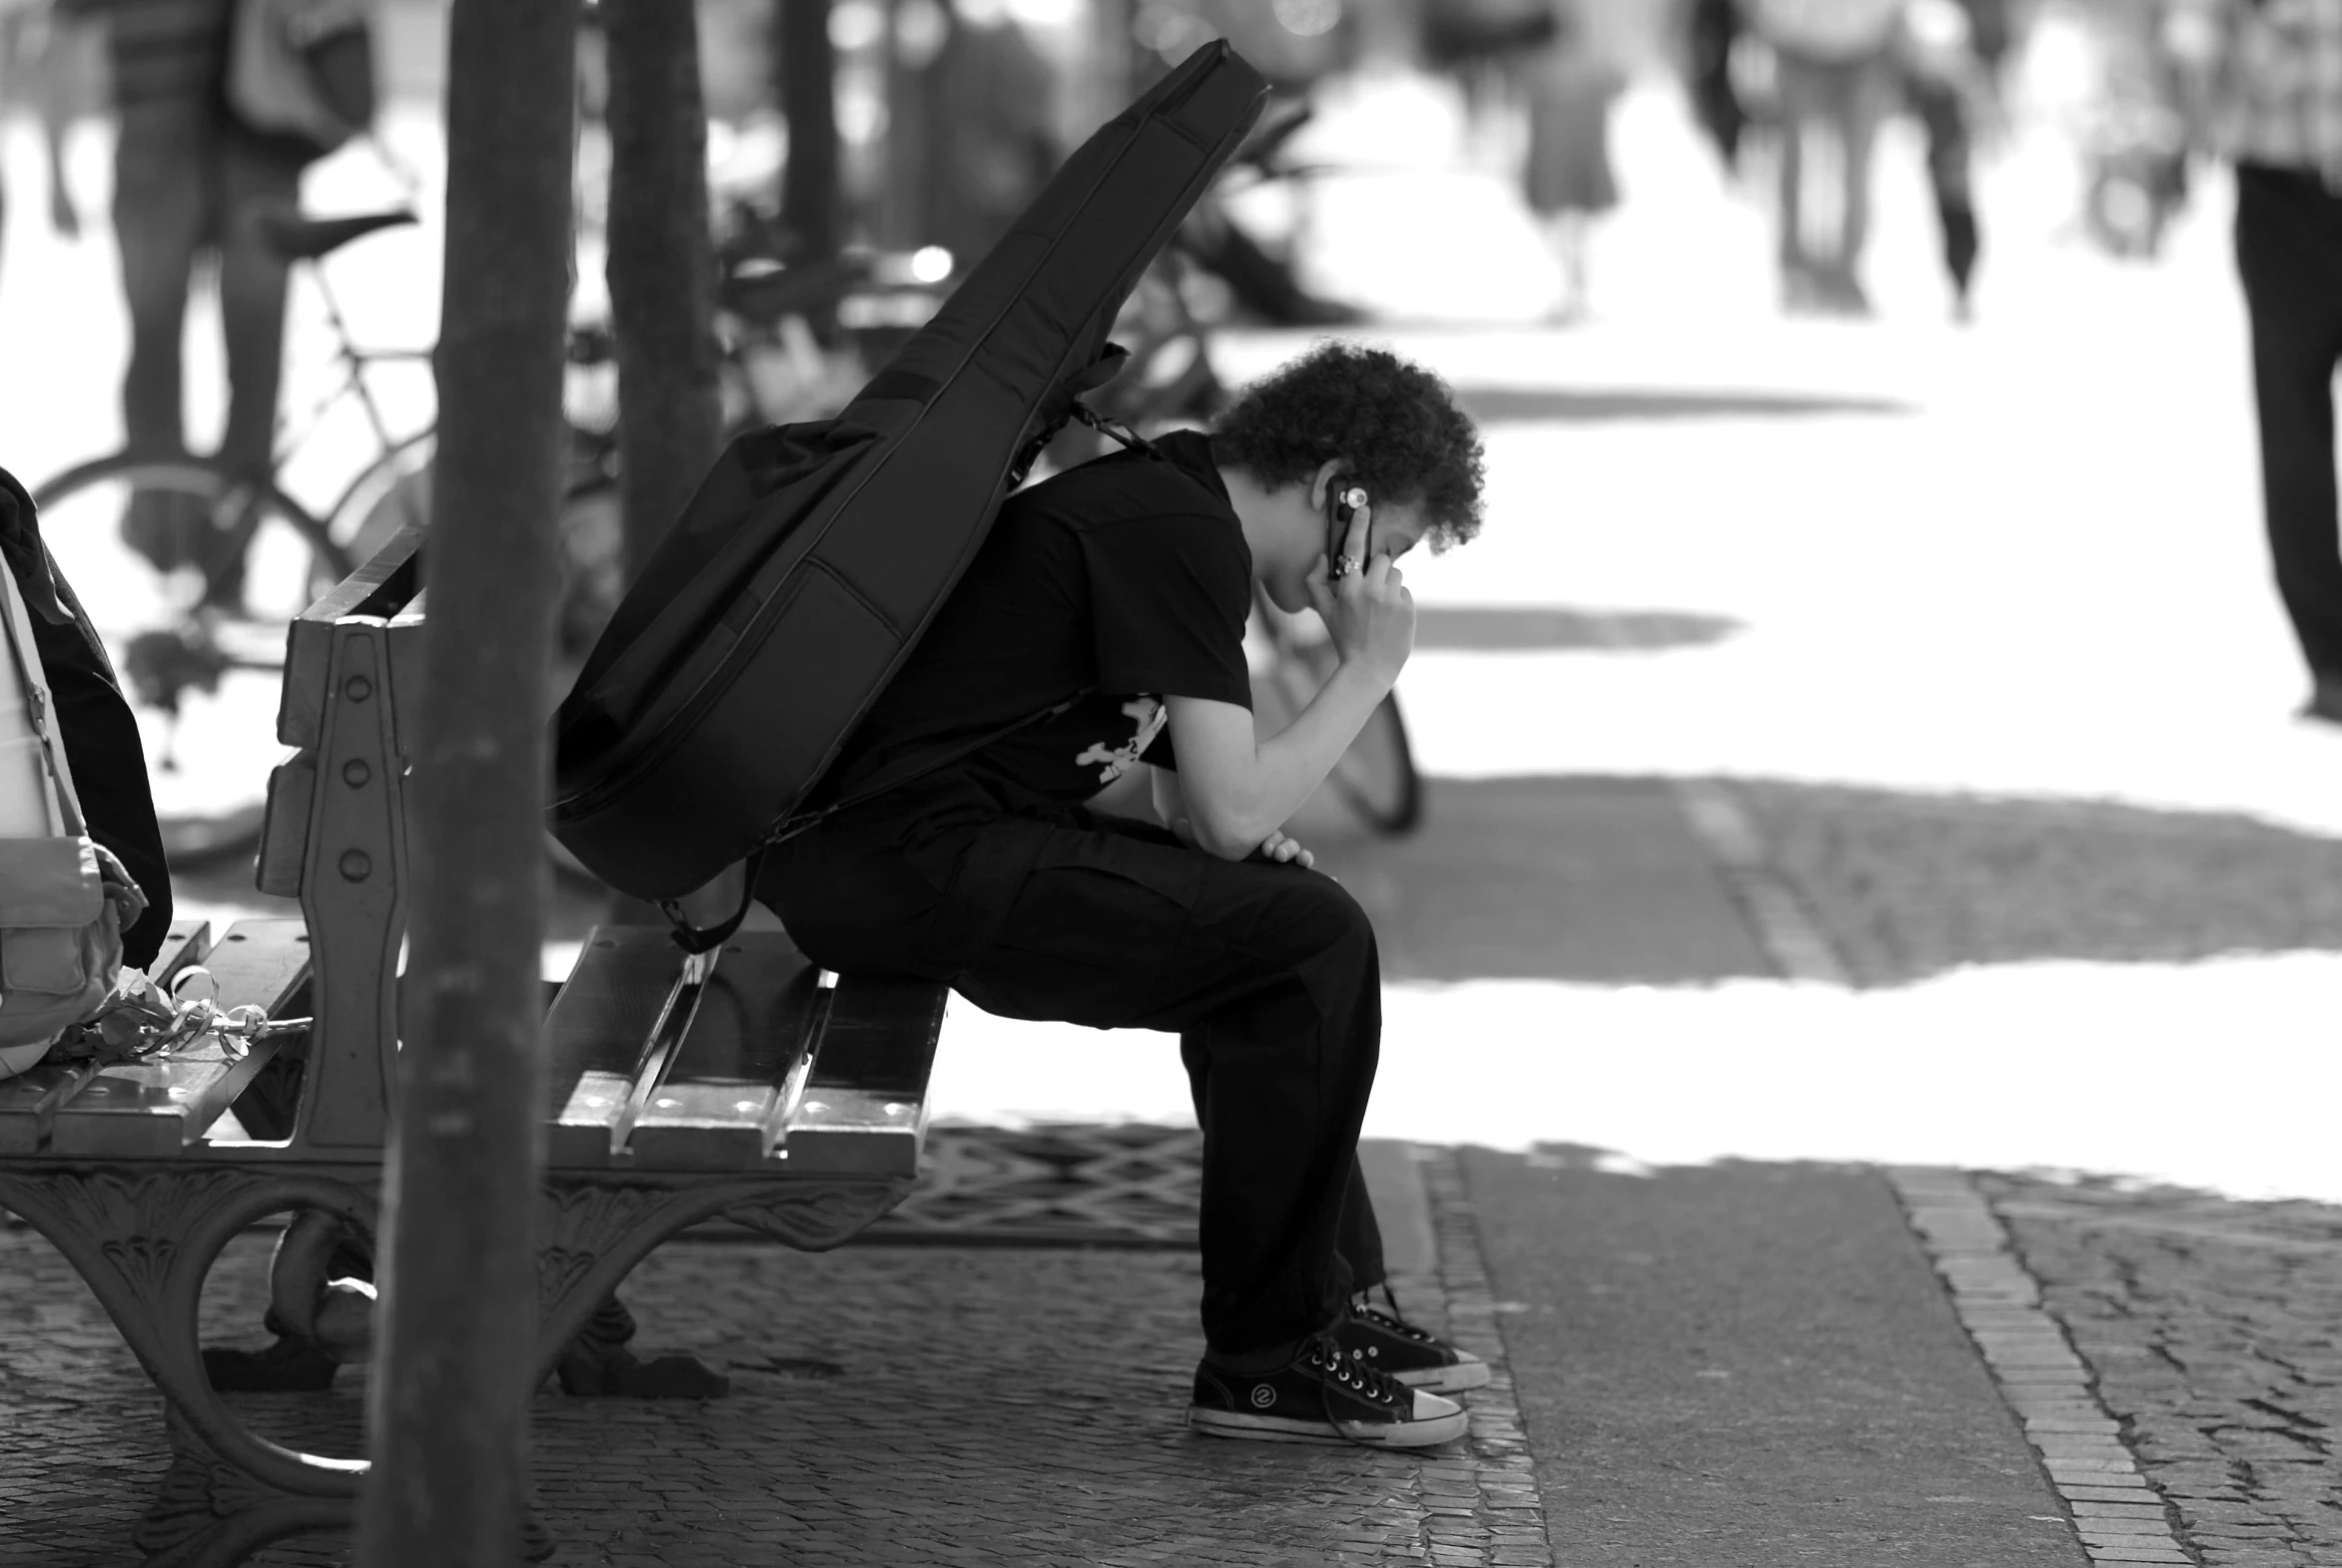 a person with a backpack on sitting at a bench